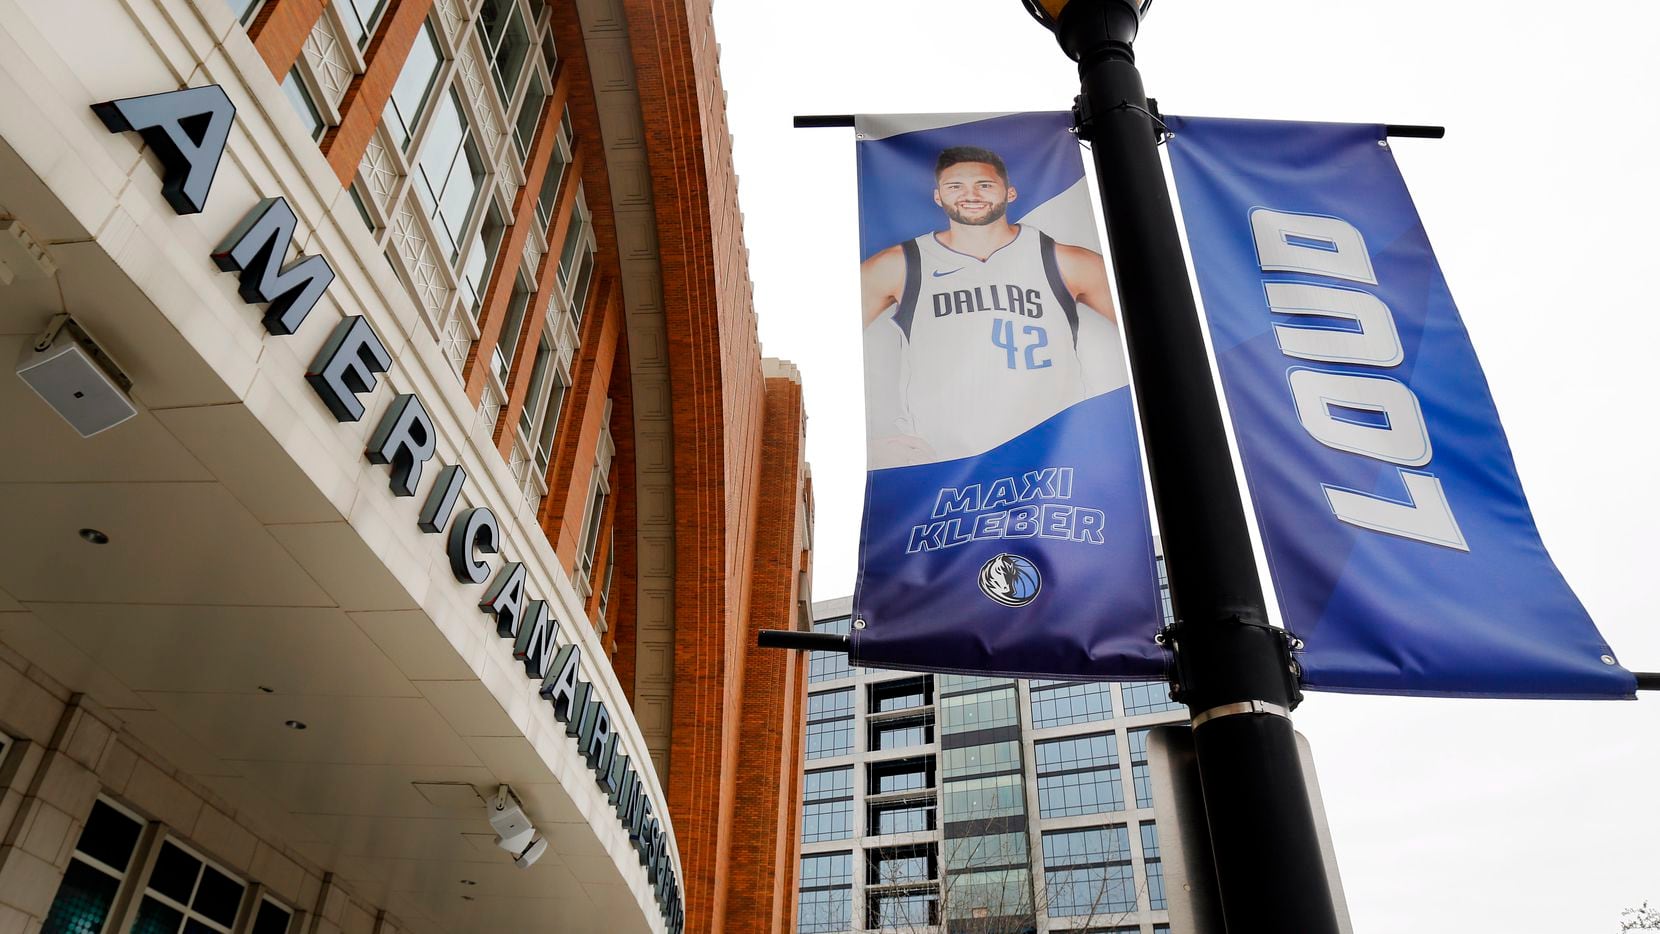 Because of the widespread loss of electricity from the snow storm, the Dallas Stars and Dallas Mavericks have canceled games at the now closed American Airlines Center in Dallas to preserve energy, Tuesday, February 16, 2021.